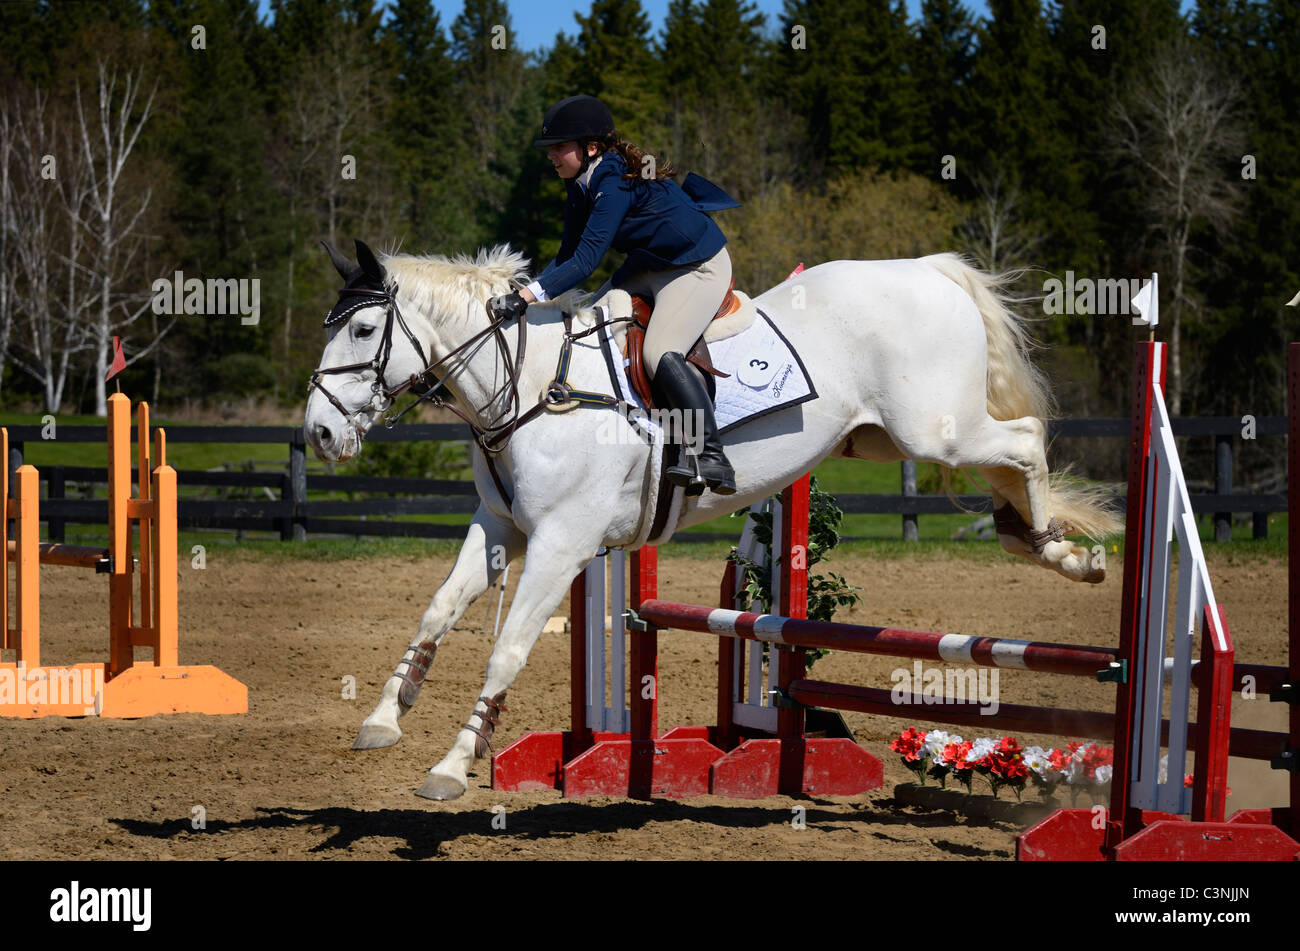 Gray horse jumping over a ramped oxer fence at an outdoor equestrian show competition Stock Photo